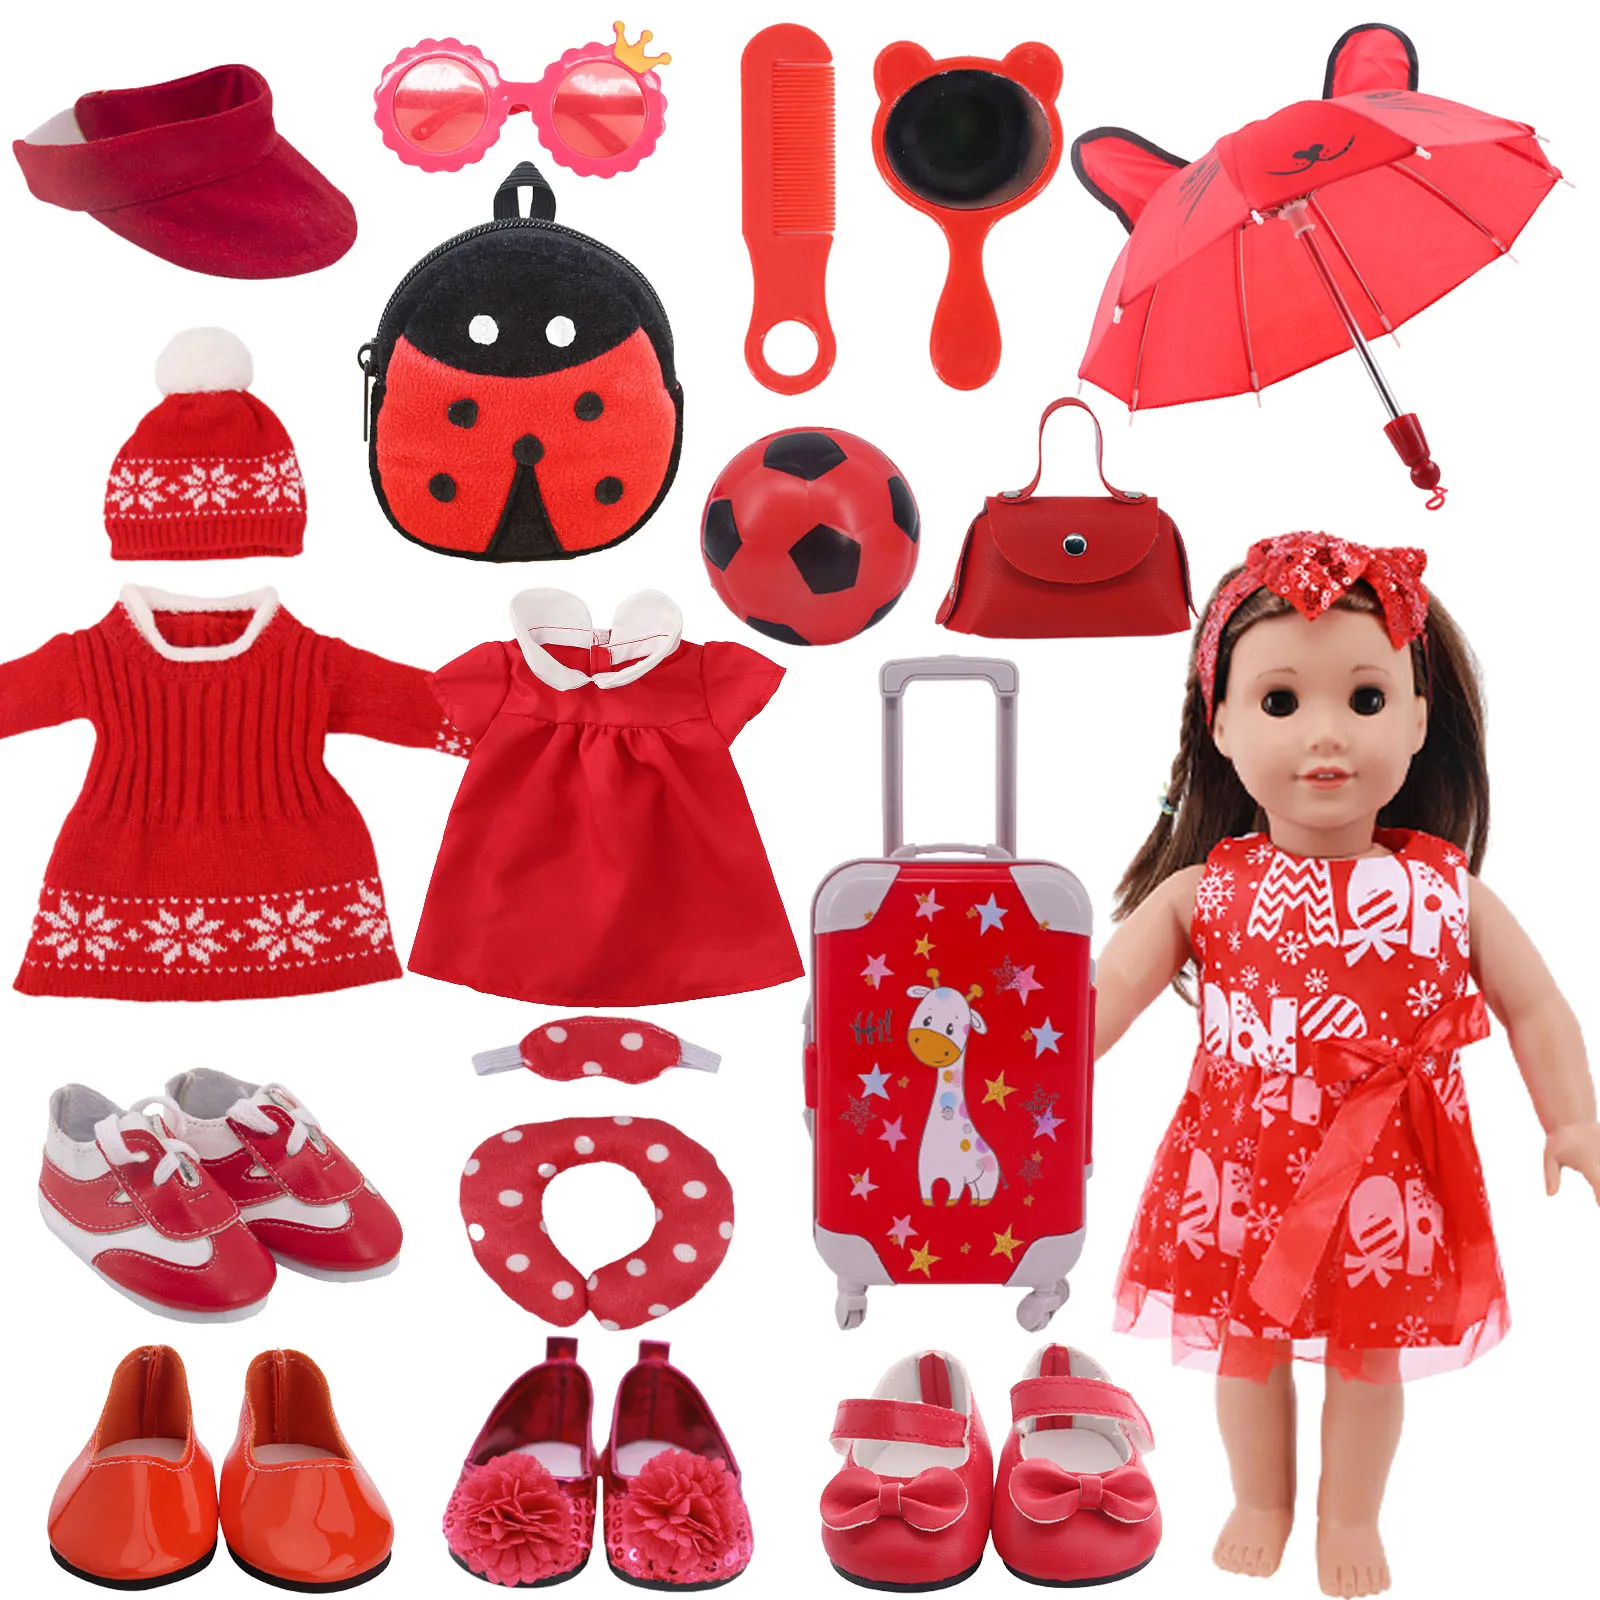 Doll New Year Red Skirt Dress Suit Doll Clothes Accessories Fits 18 Inch American&43Cm Baby New Born Doll Reborn Girl`s Toy 18inch doll red sweater suit children s toy doll accessories children s birthday giftc692